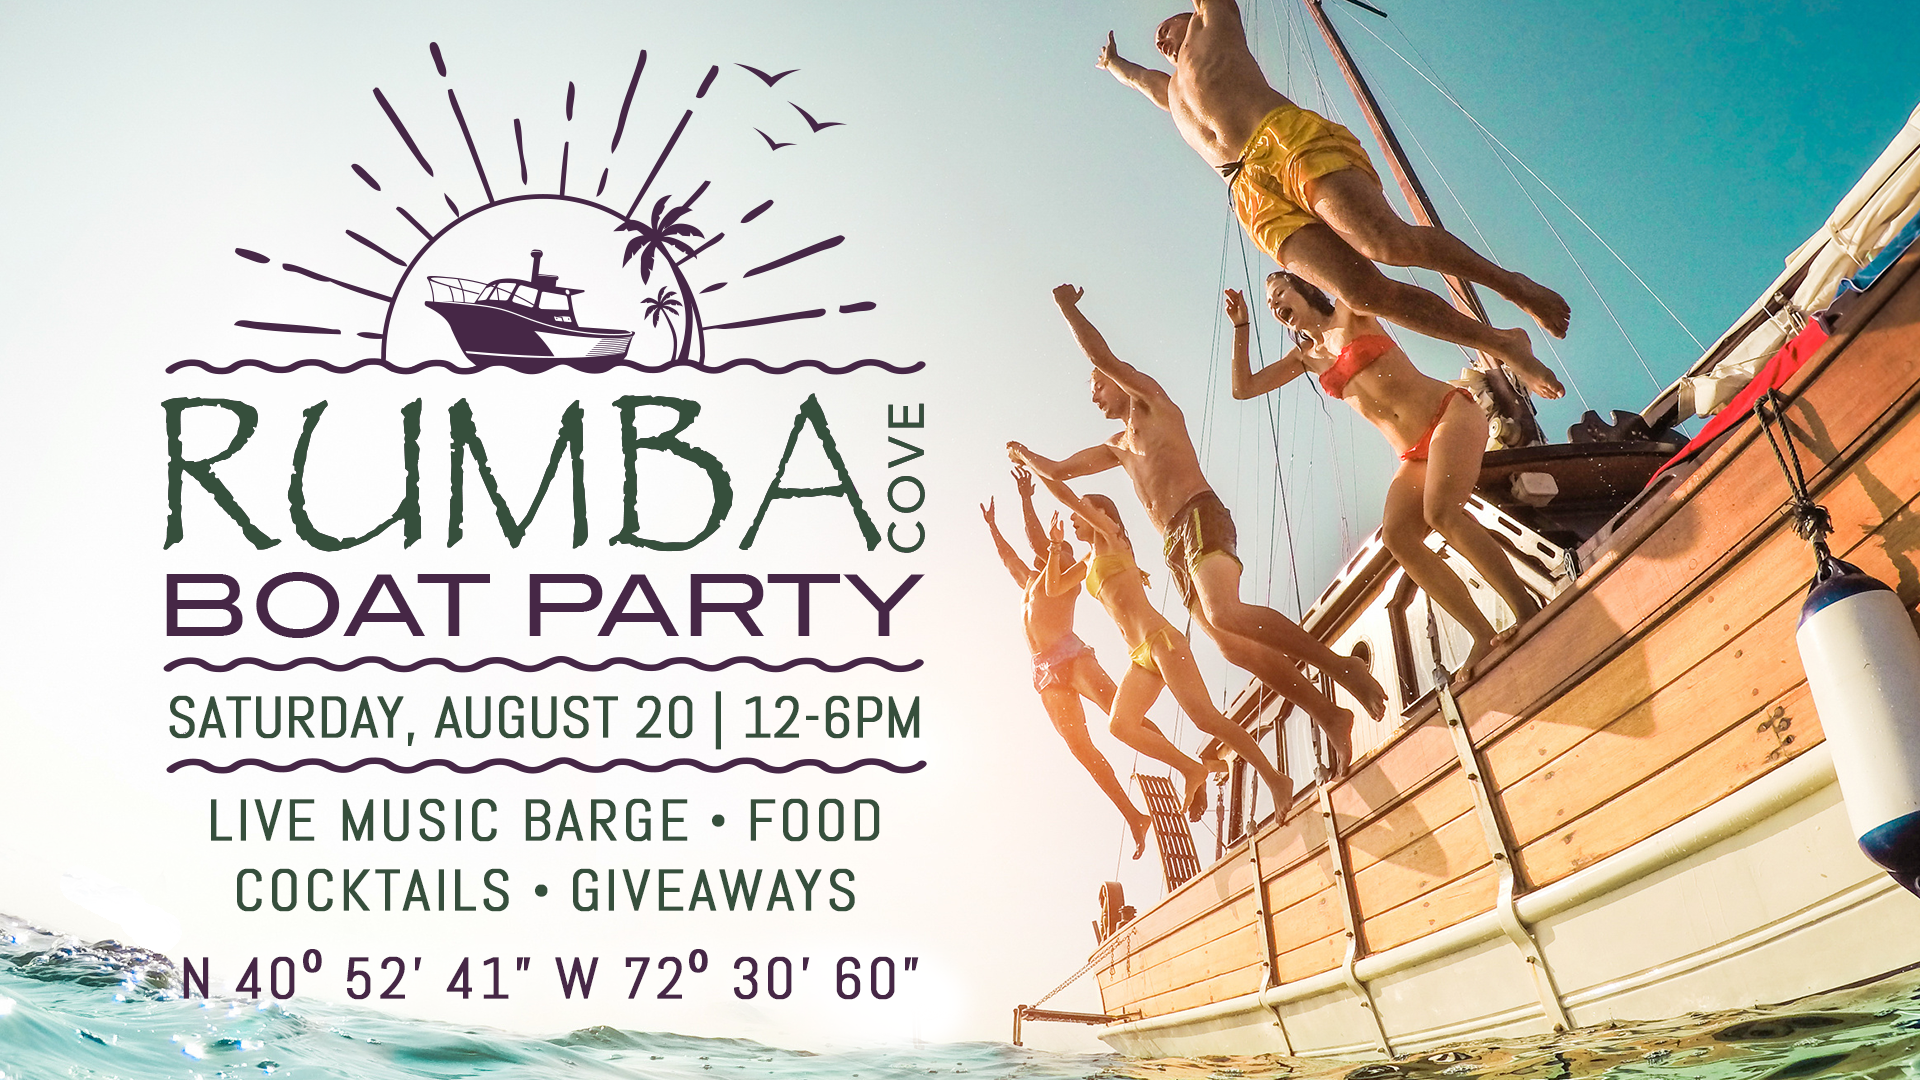 Rumba Cove Boat Party